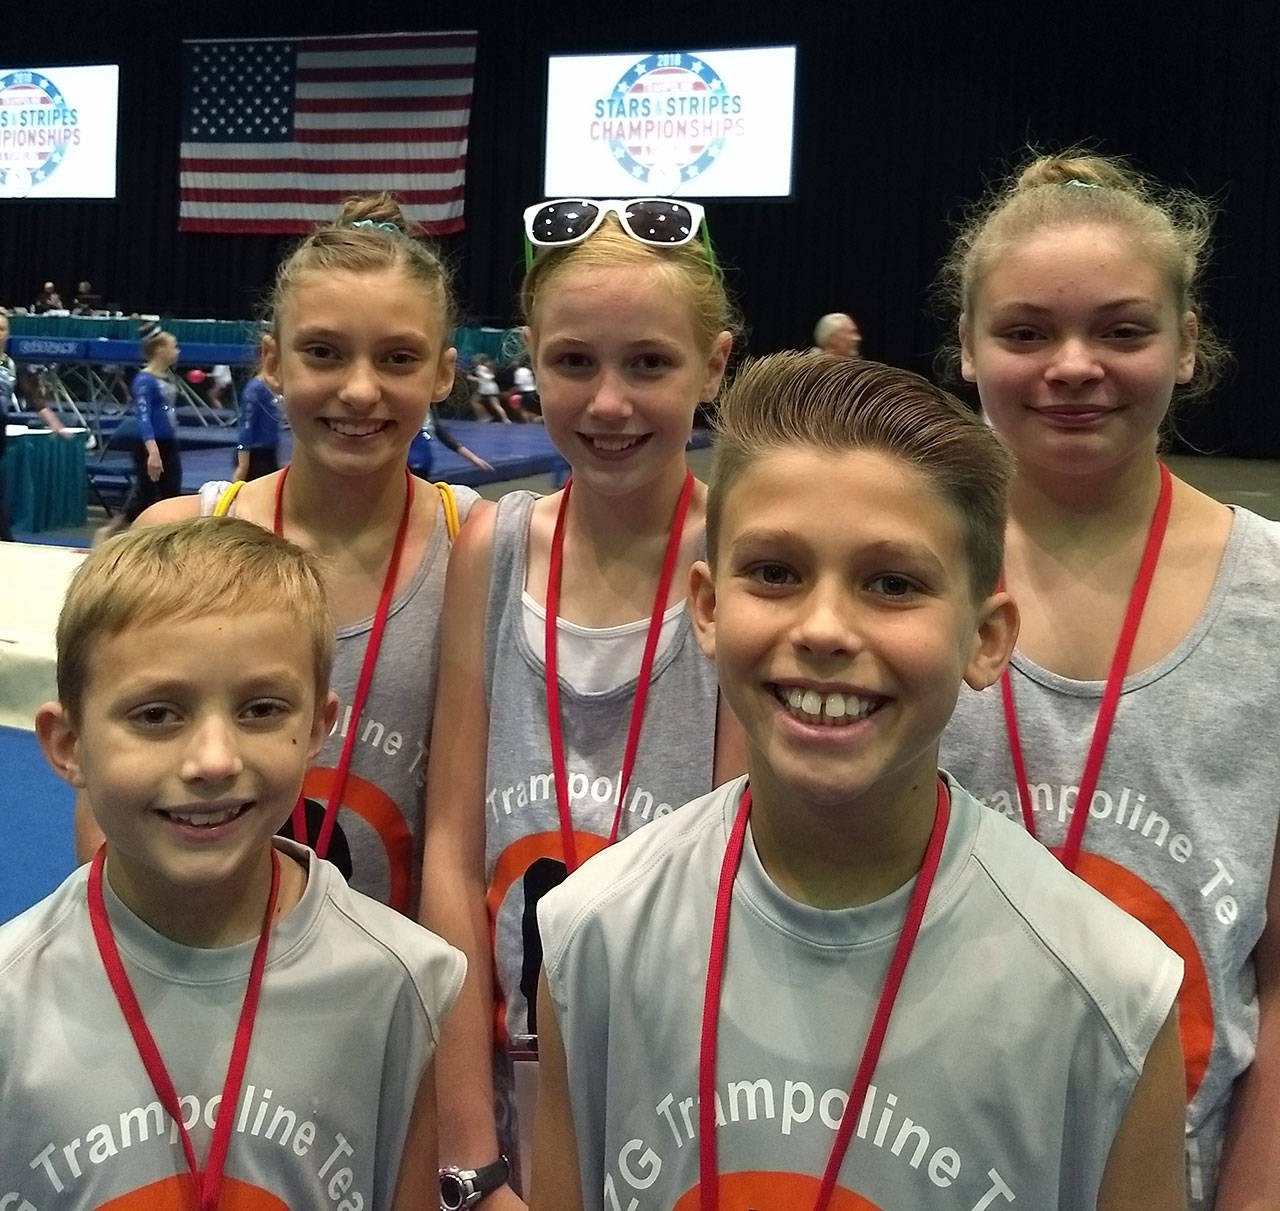 Trevor Haskins, bottom right, captured a gold medal at the national trampoline and tumbling championships in Reno this month. He was joined at the meet by Ryder Chaffins, bottom left, and Kenzie Chaffins, top left, Allison Lovett and Kaitlyn Rozycki. (Submitted photo)